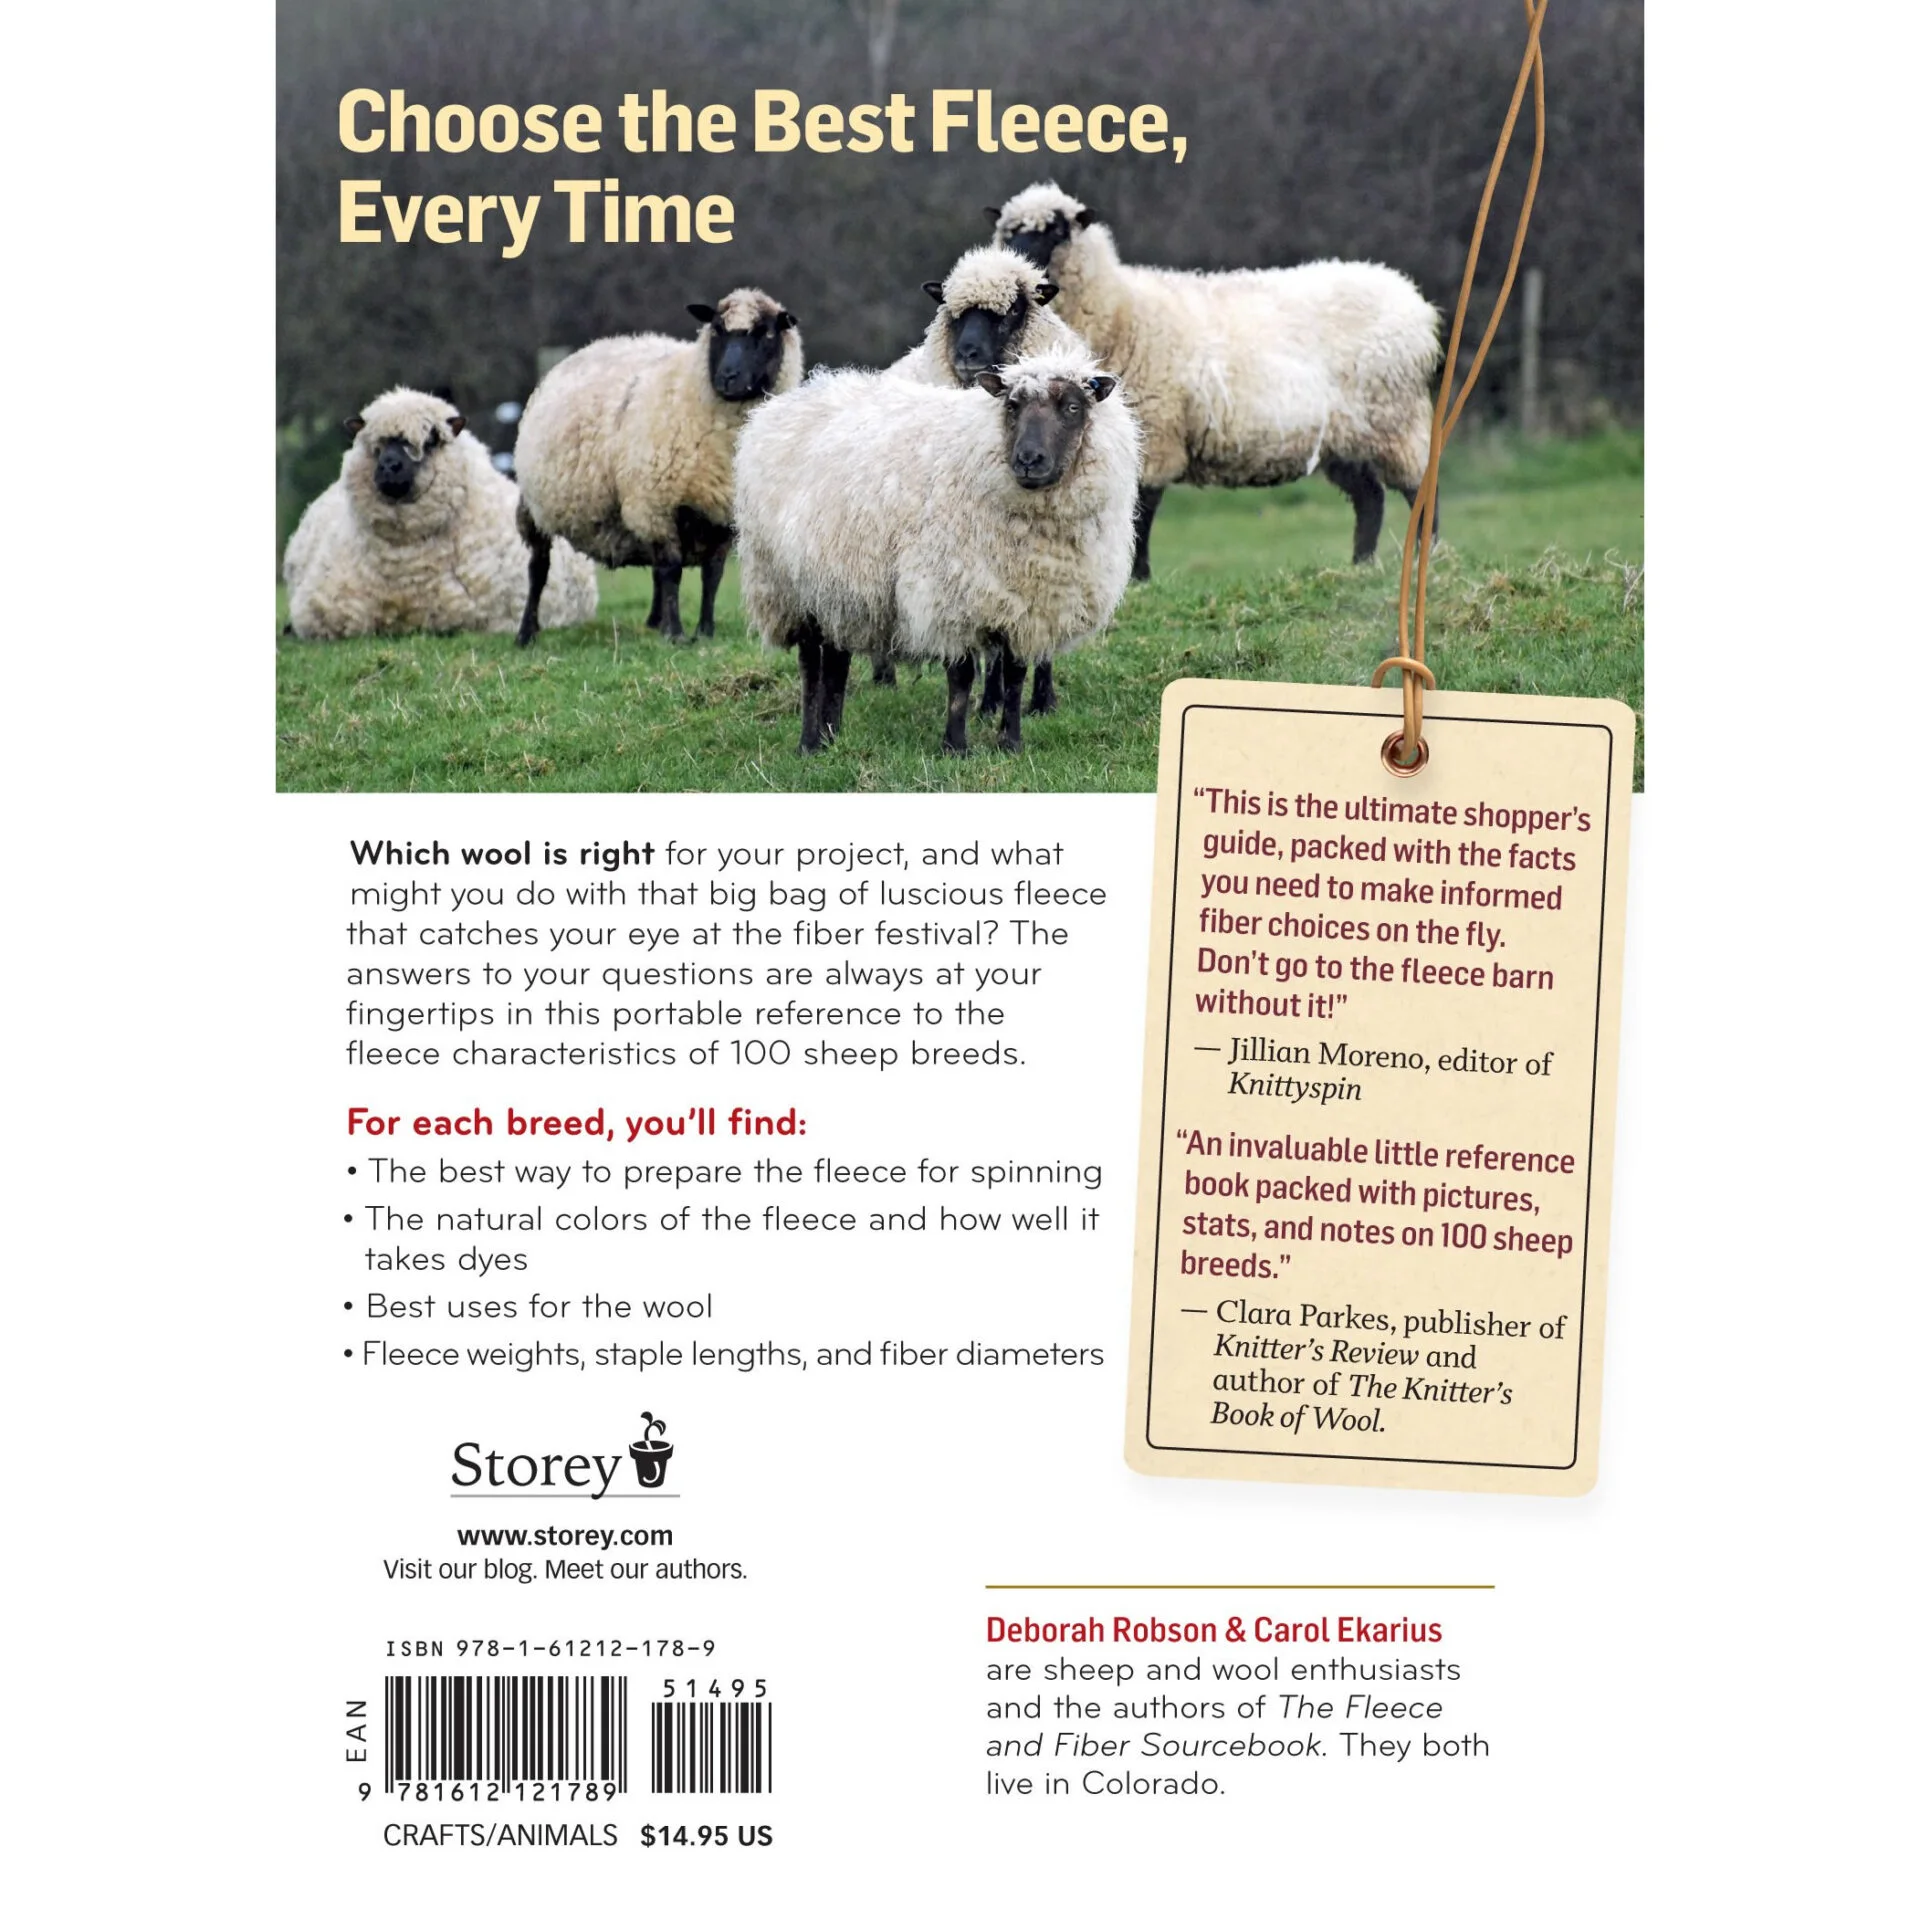 How to choose a fleece - The Complete Buying Guide